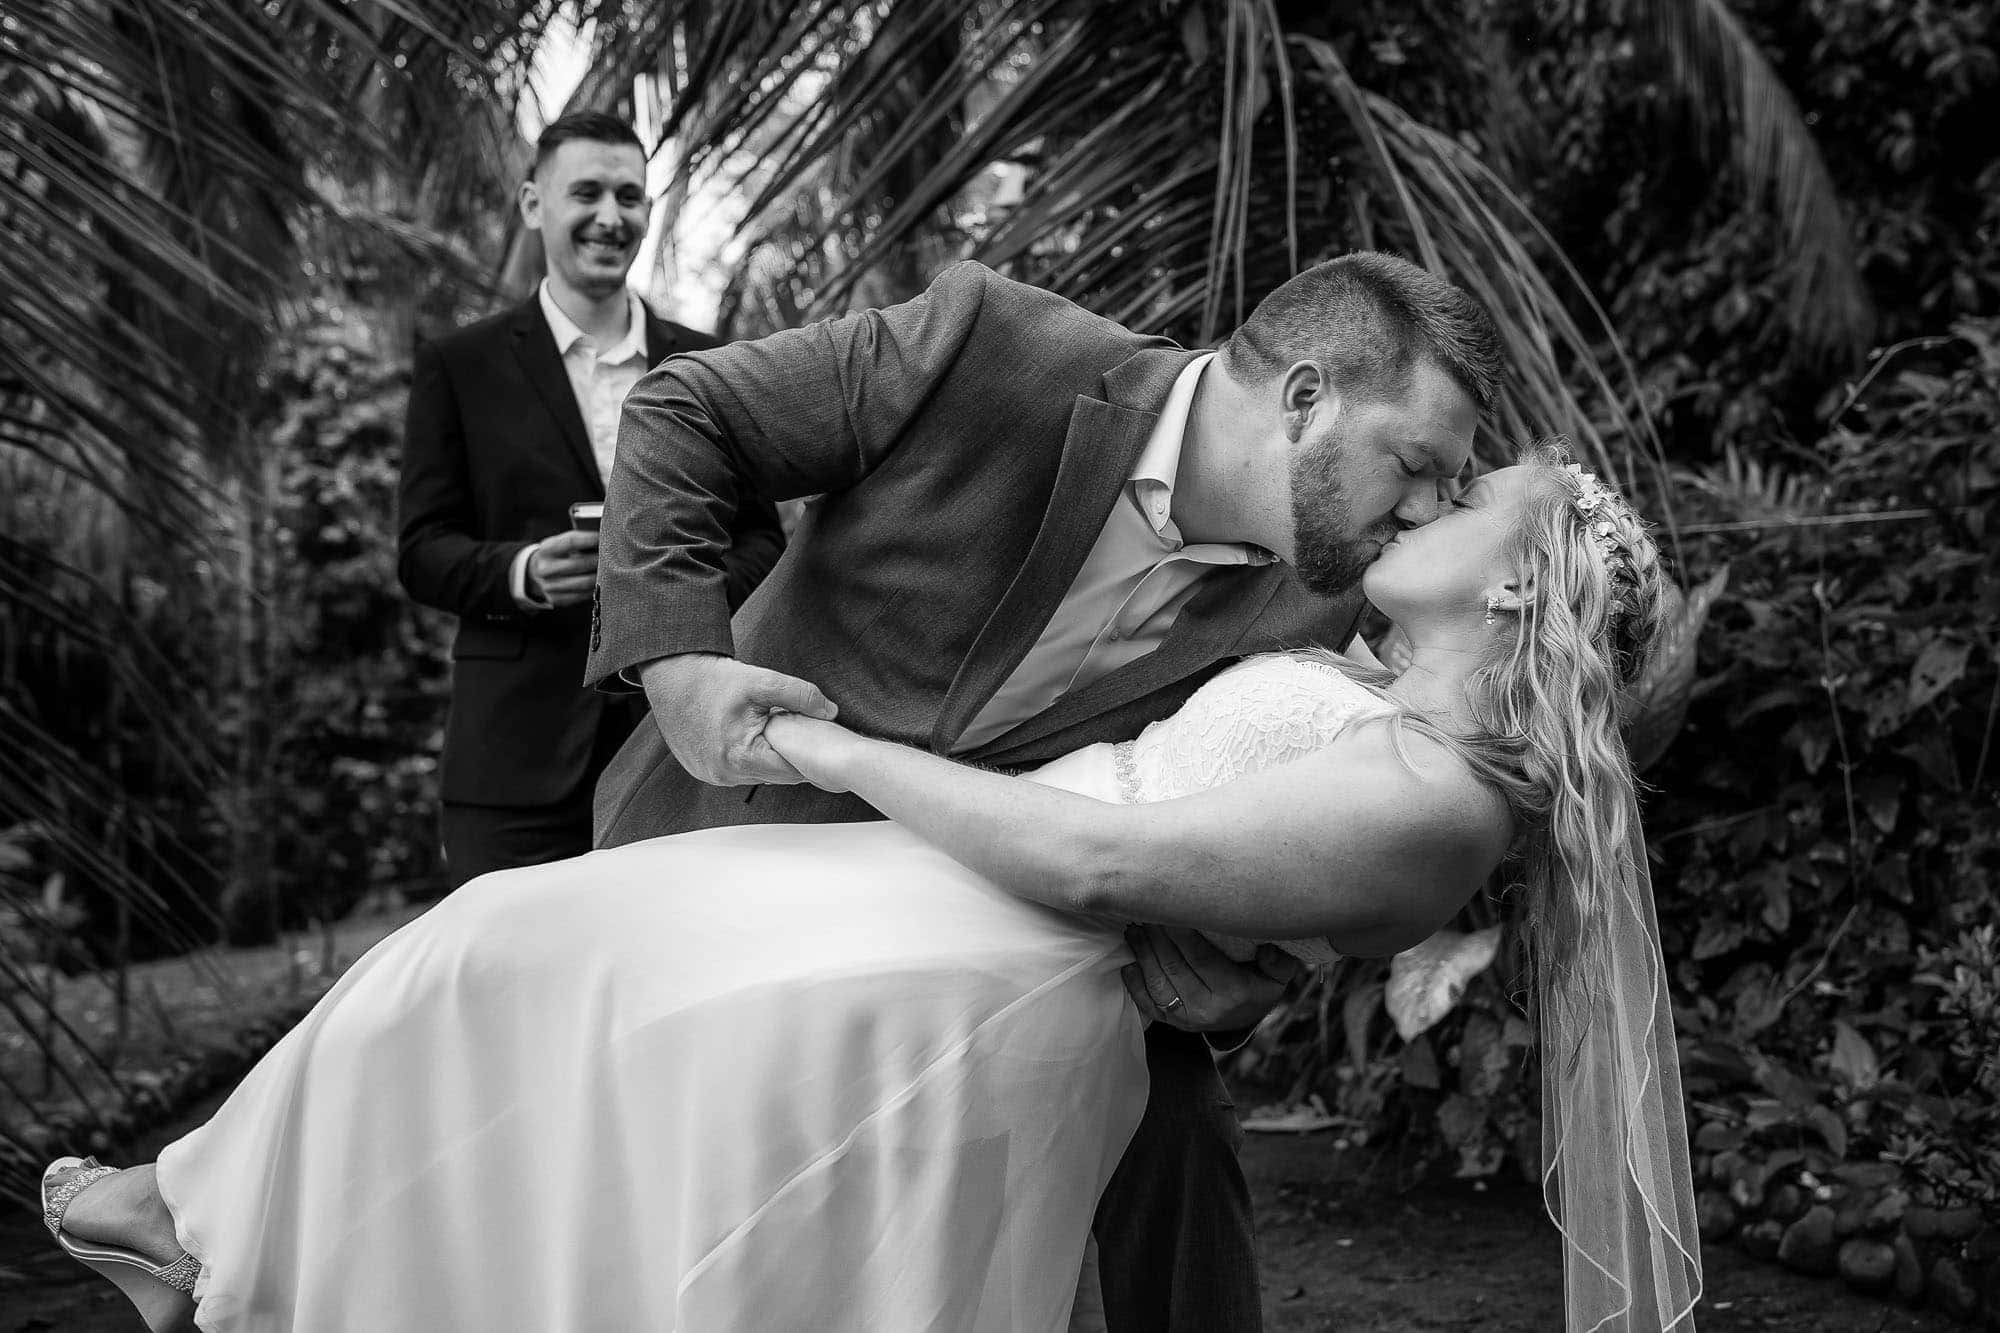 The groom dips the bride for a kiss